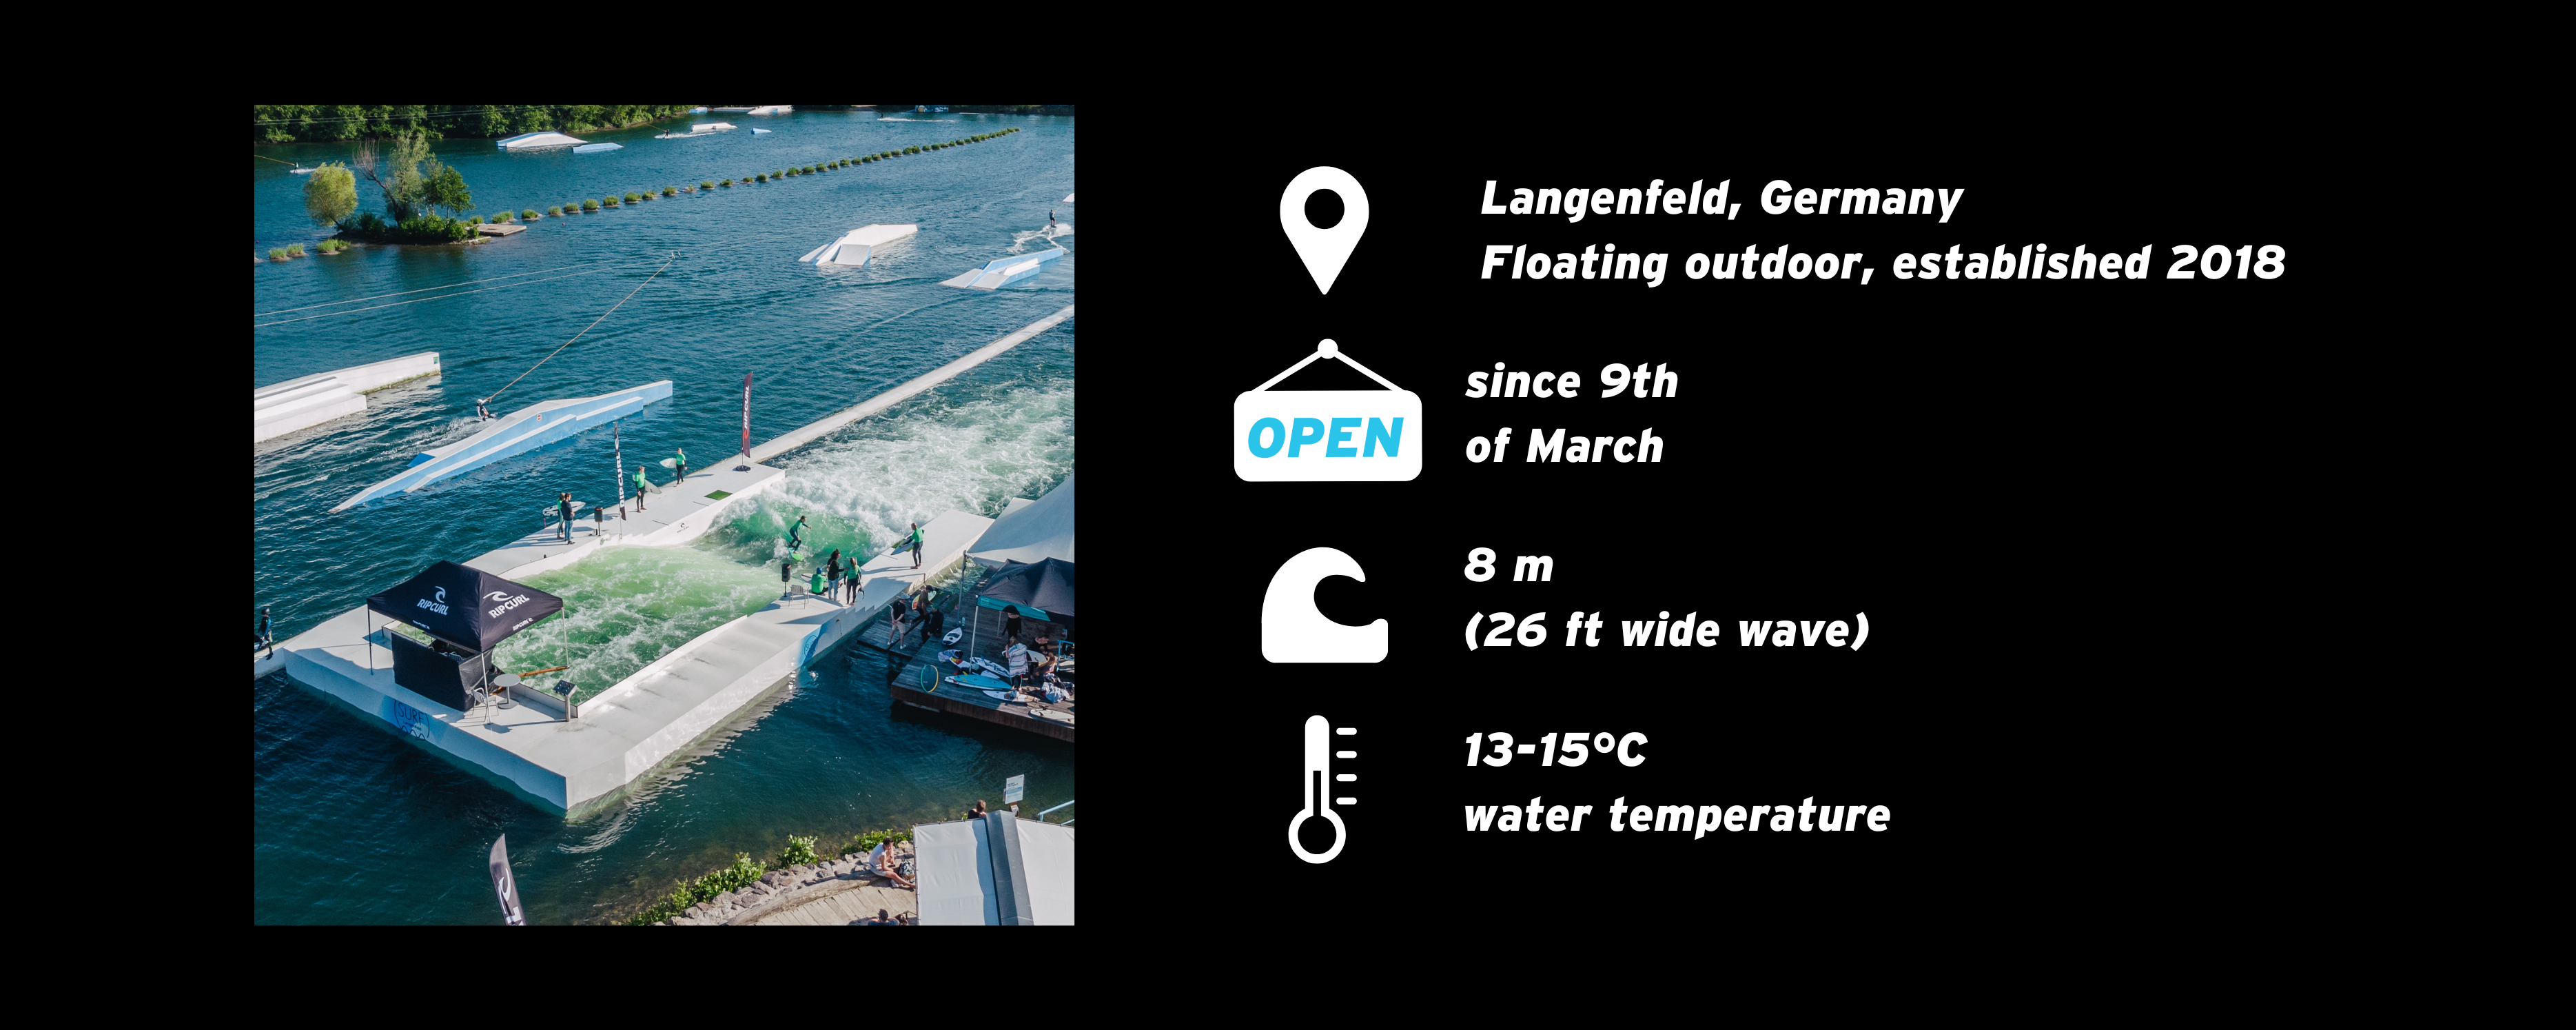 Information about the UNIT Surf Pool at Surf Langenfeld